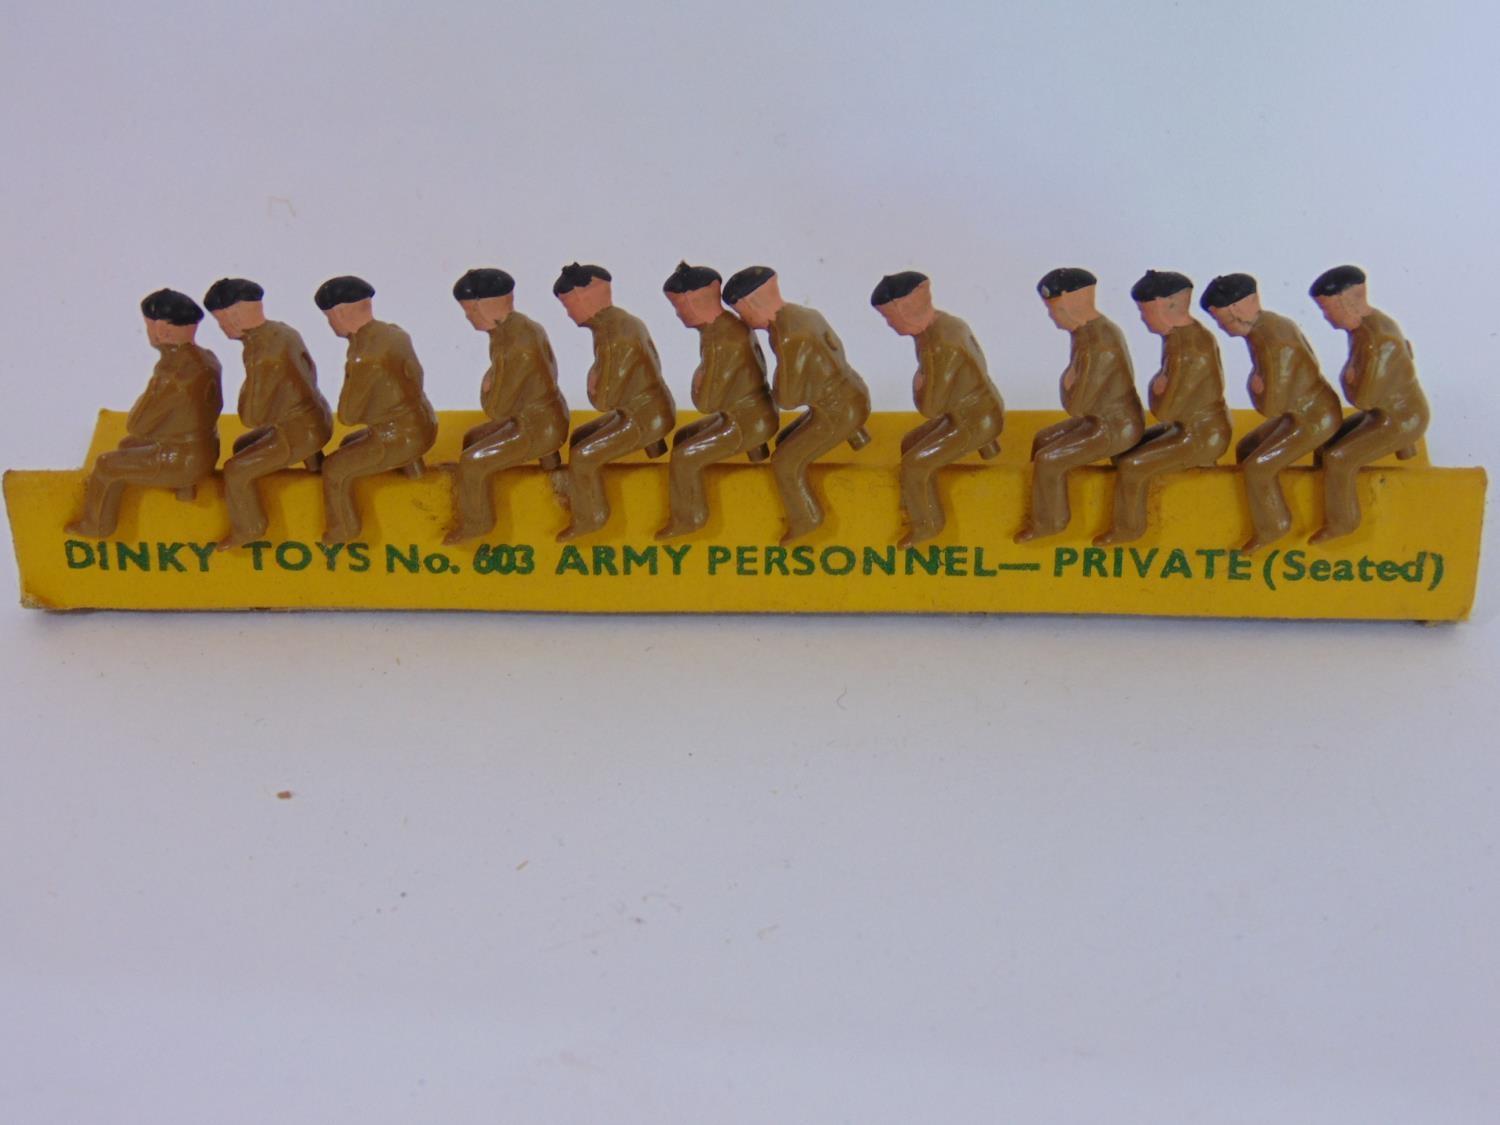 2 complete sets of Dinky Toys 603 Army Personnel (seated) together with other similar unboxed - Image 2 of 4